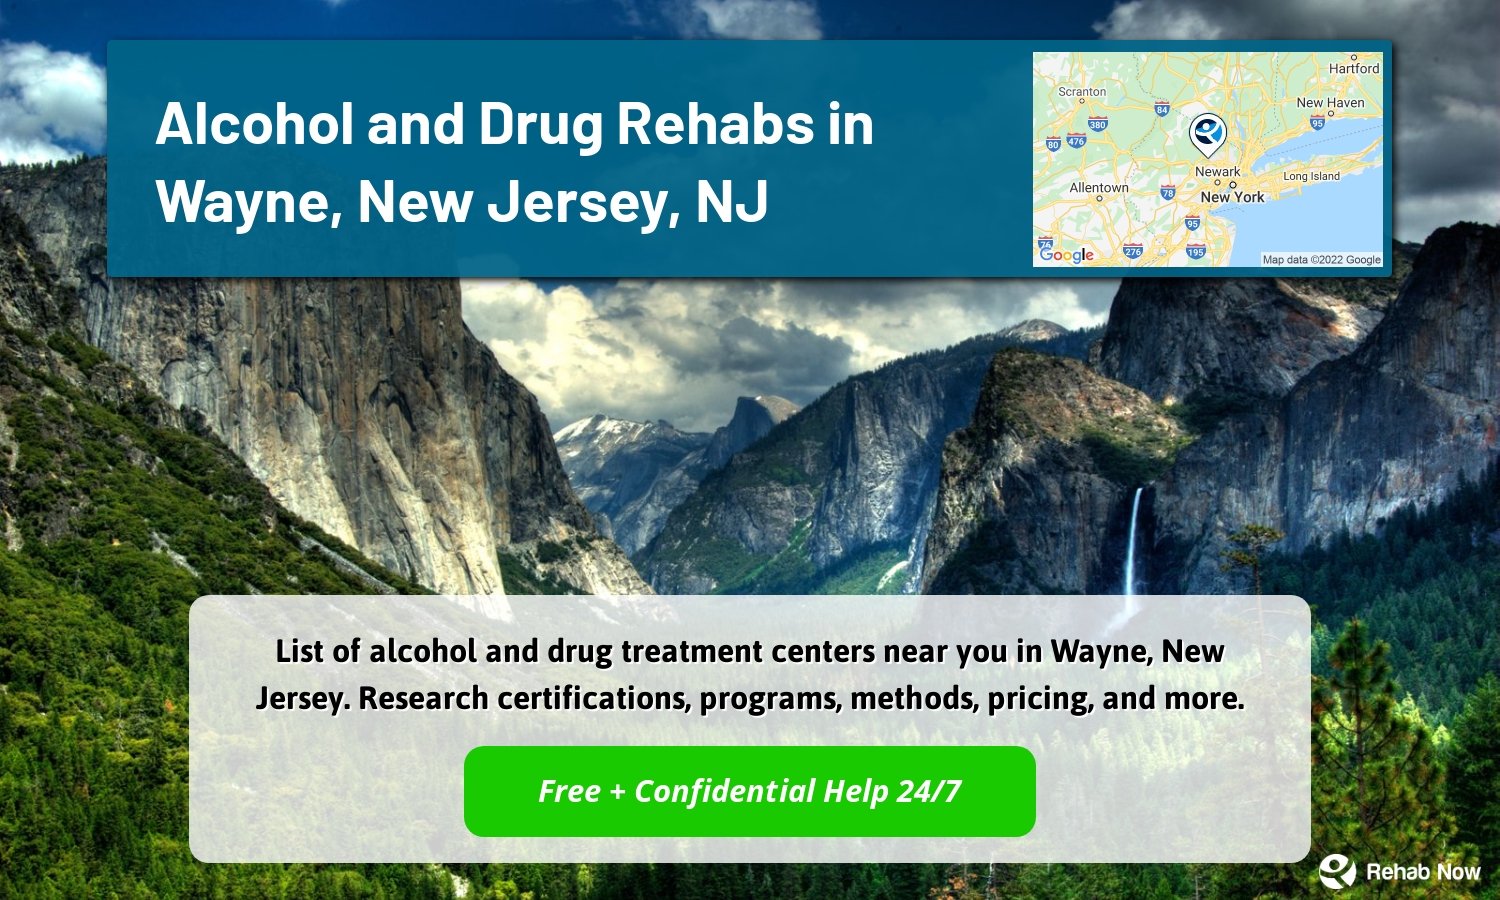 List of alcohol and drug treatment centers near you in Wayne, New Jersey. Research certifications, programs, methods, pricing, and more.